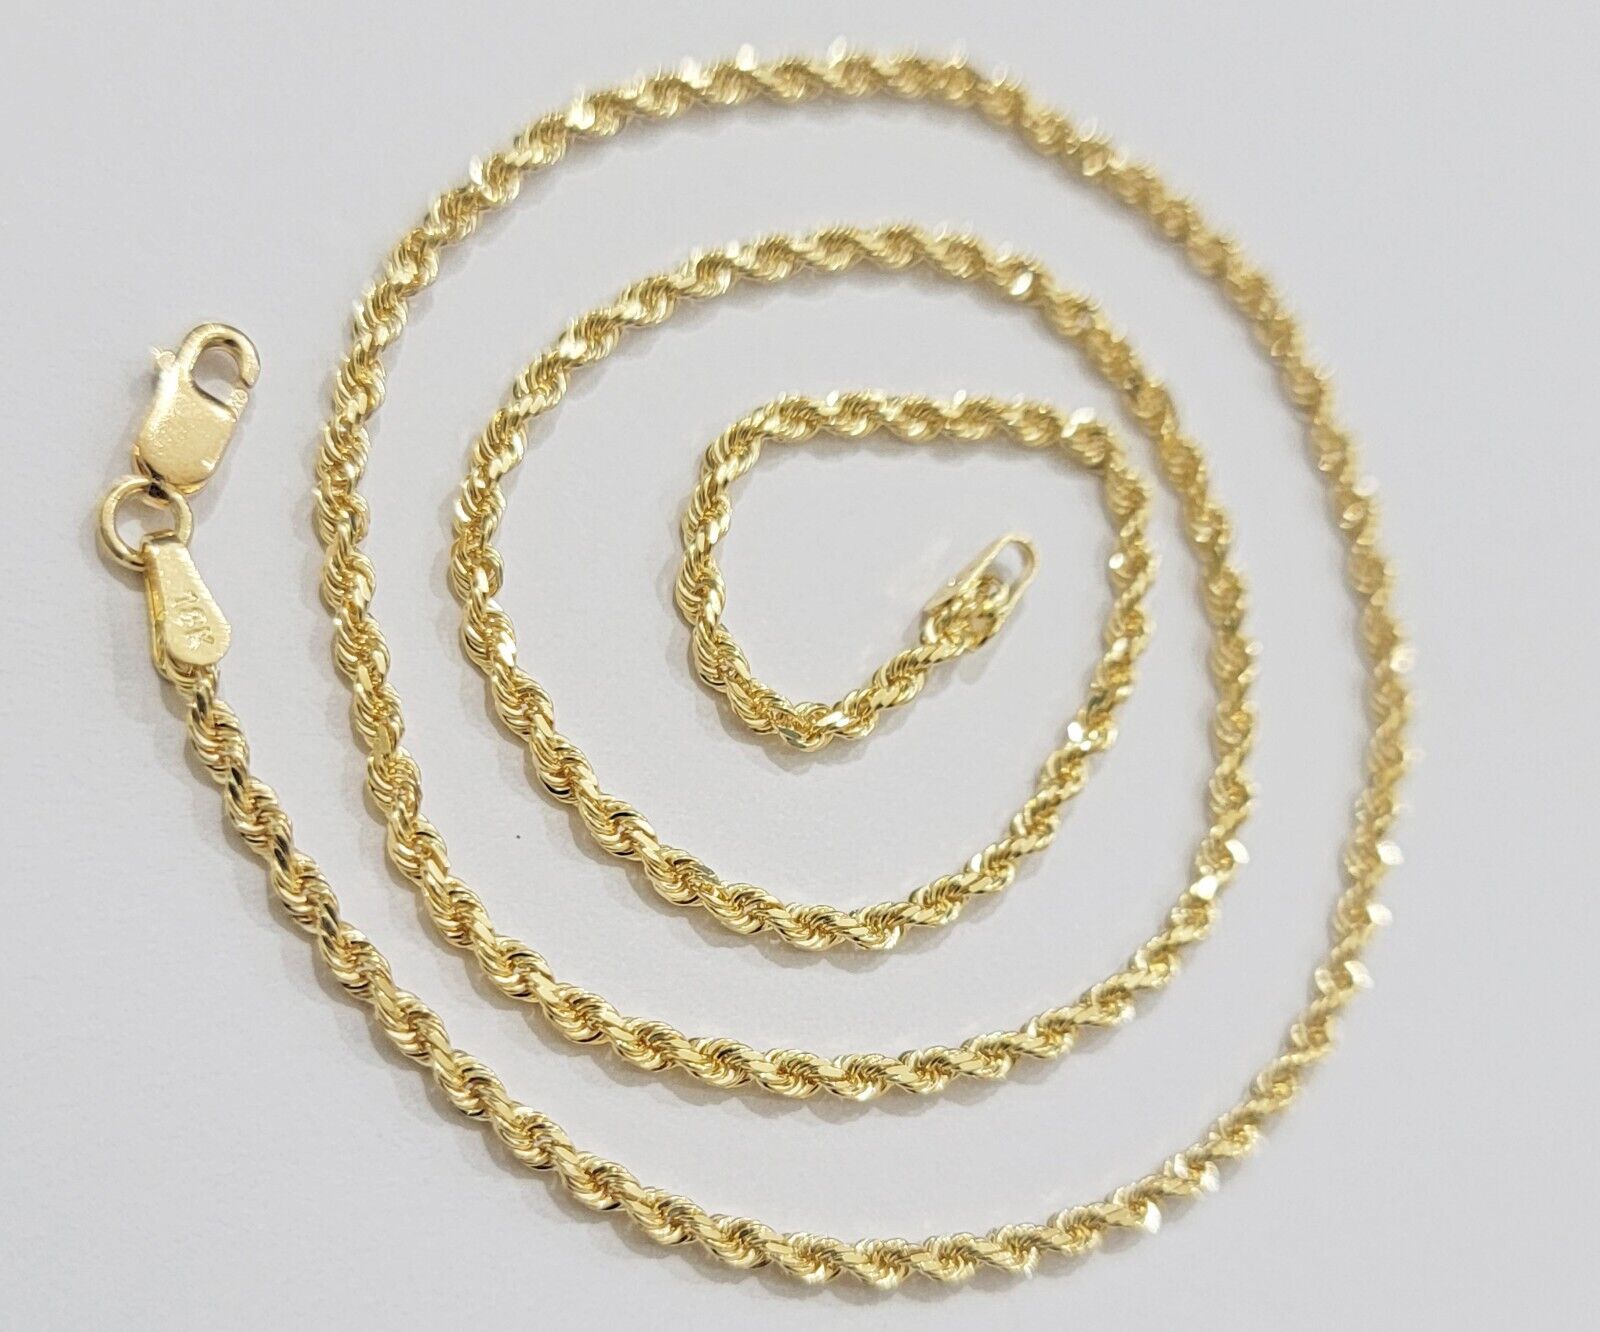 Real 18k Yellow Gold Rope Chain Necklace 20 Inch 2mm Solid 18 KT Men Women, SALE